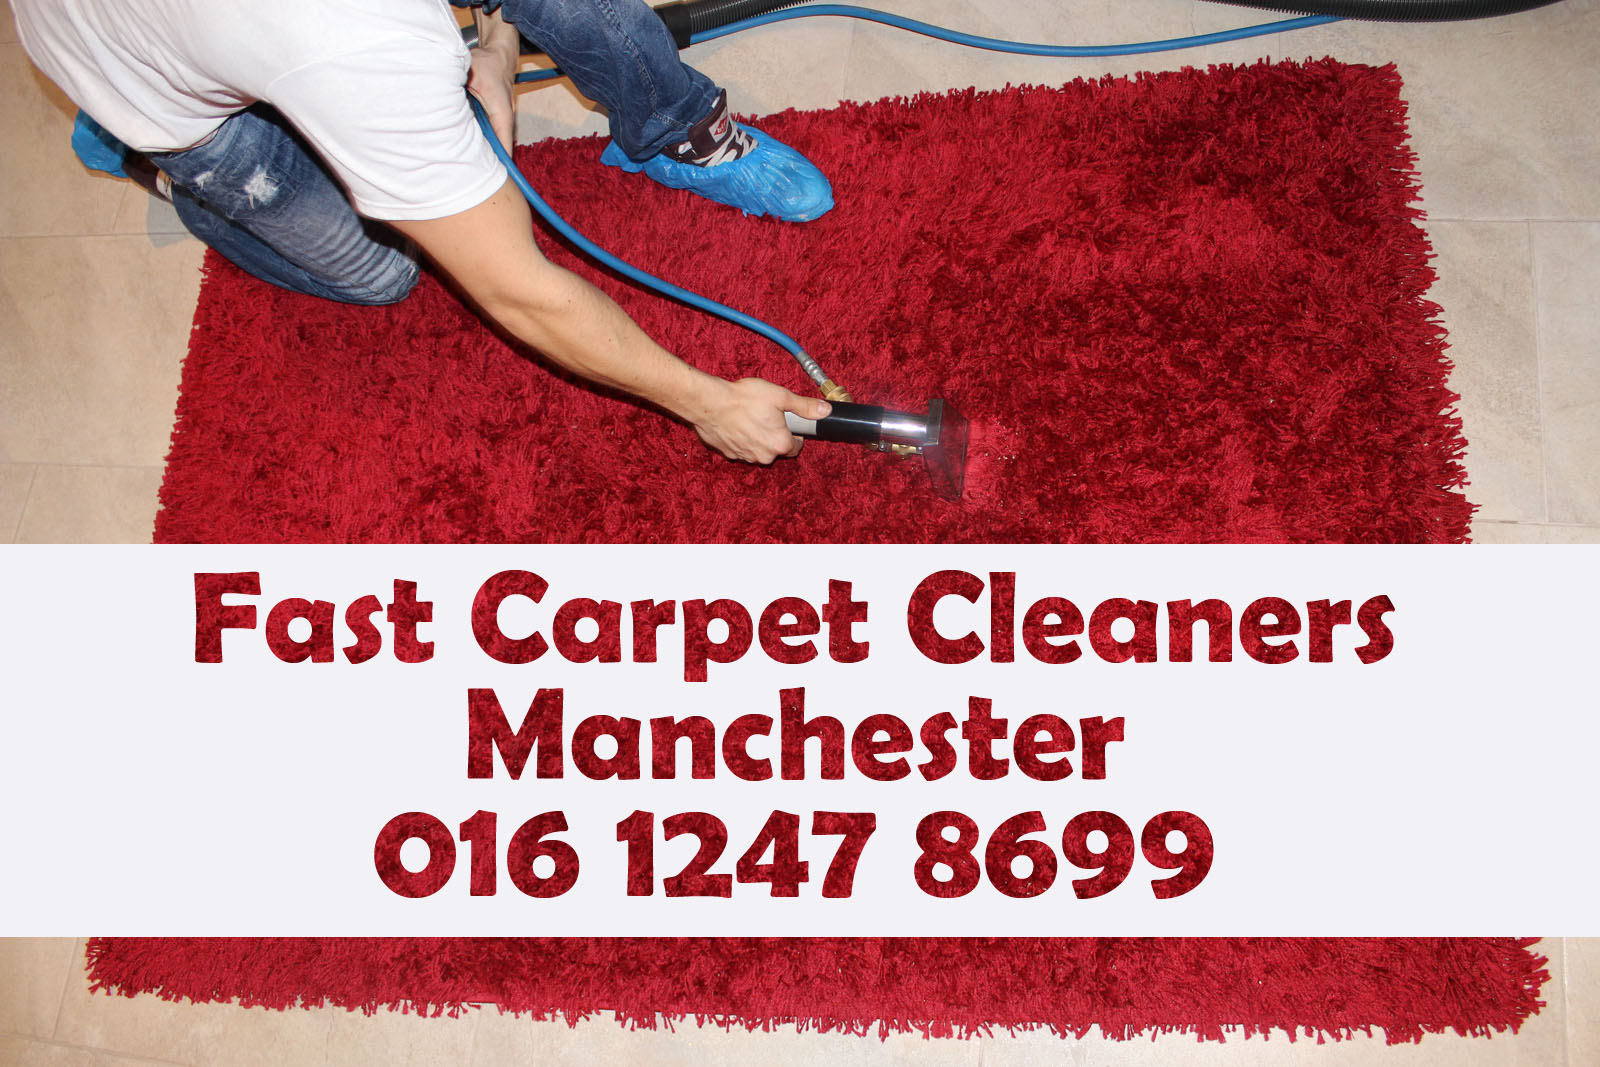 Carpet-Cleaning-Cleaners-Manchester